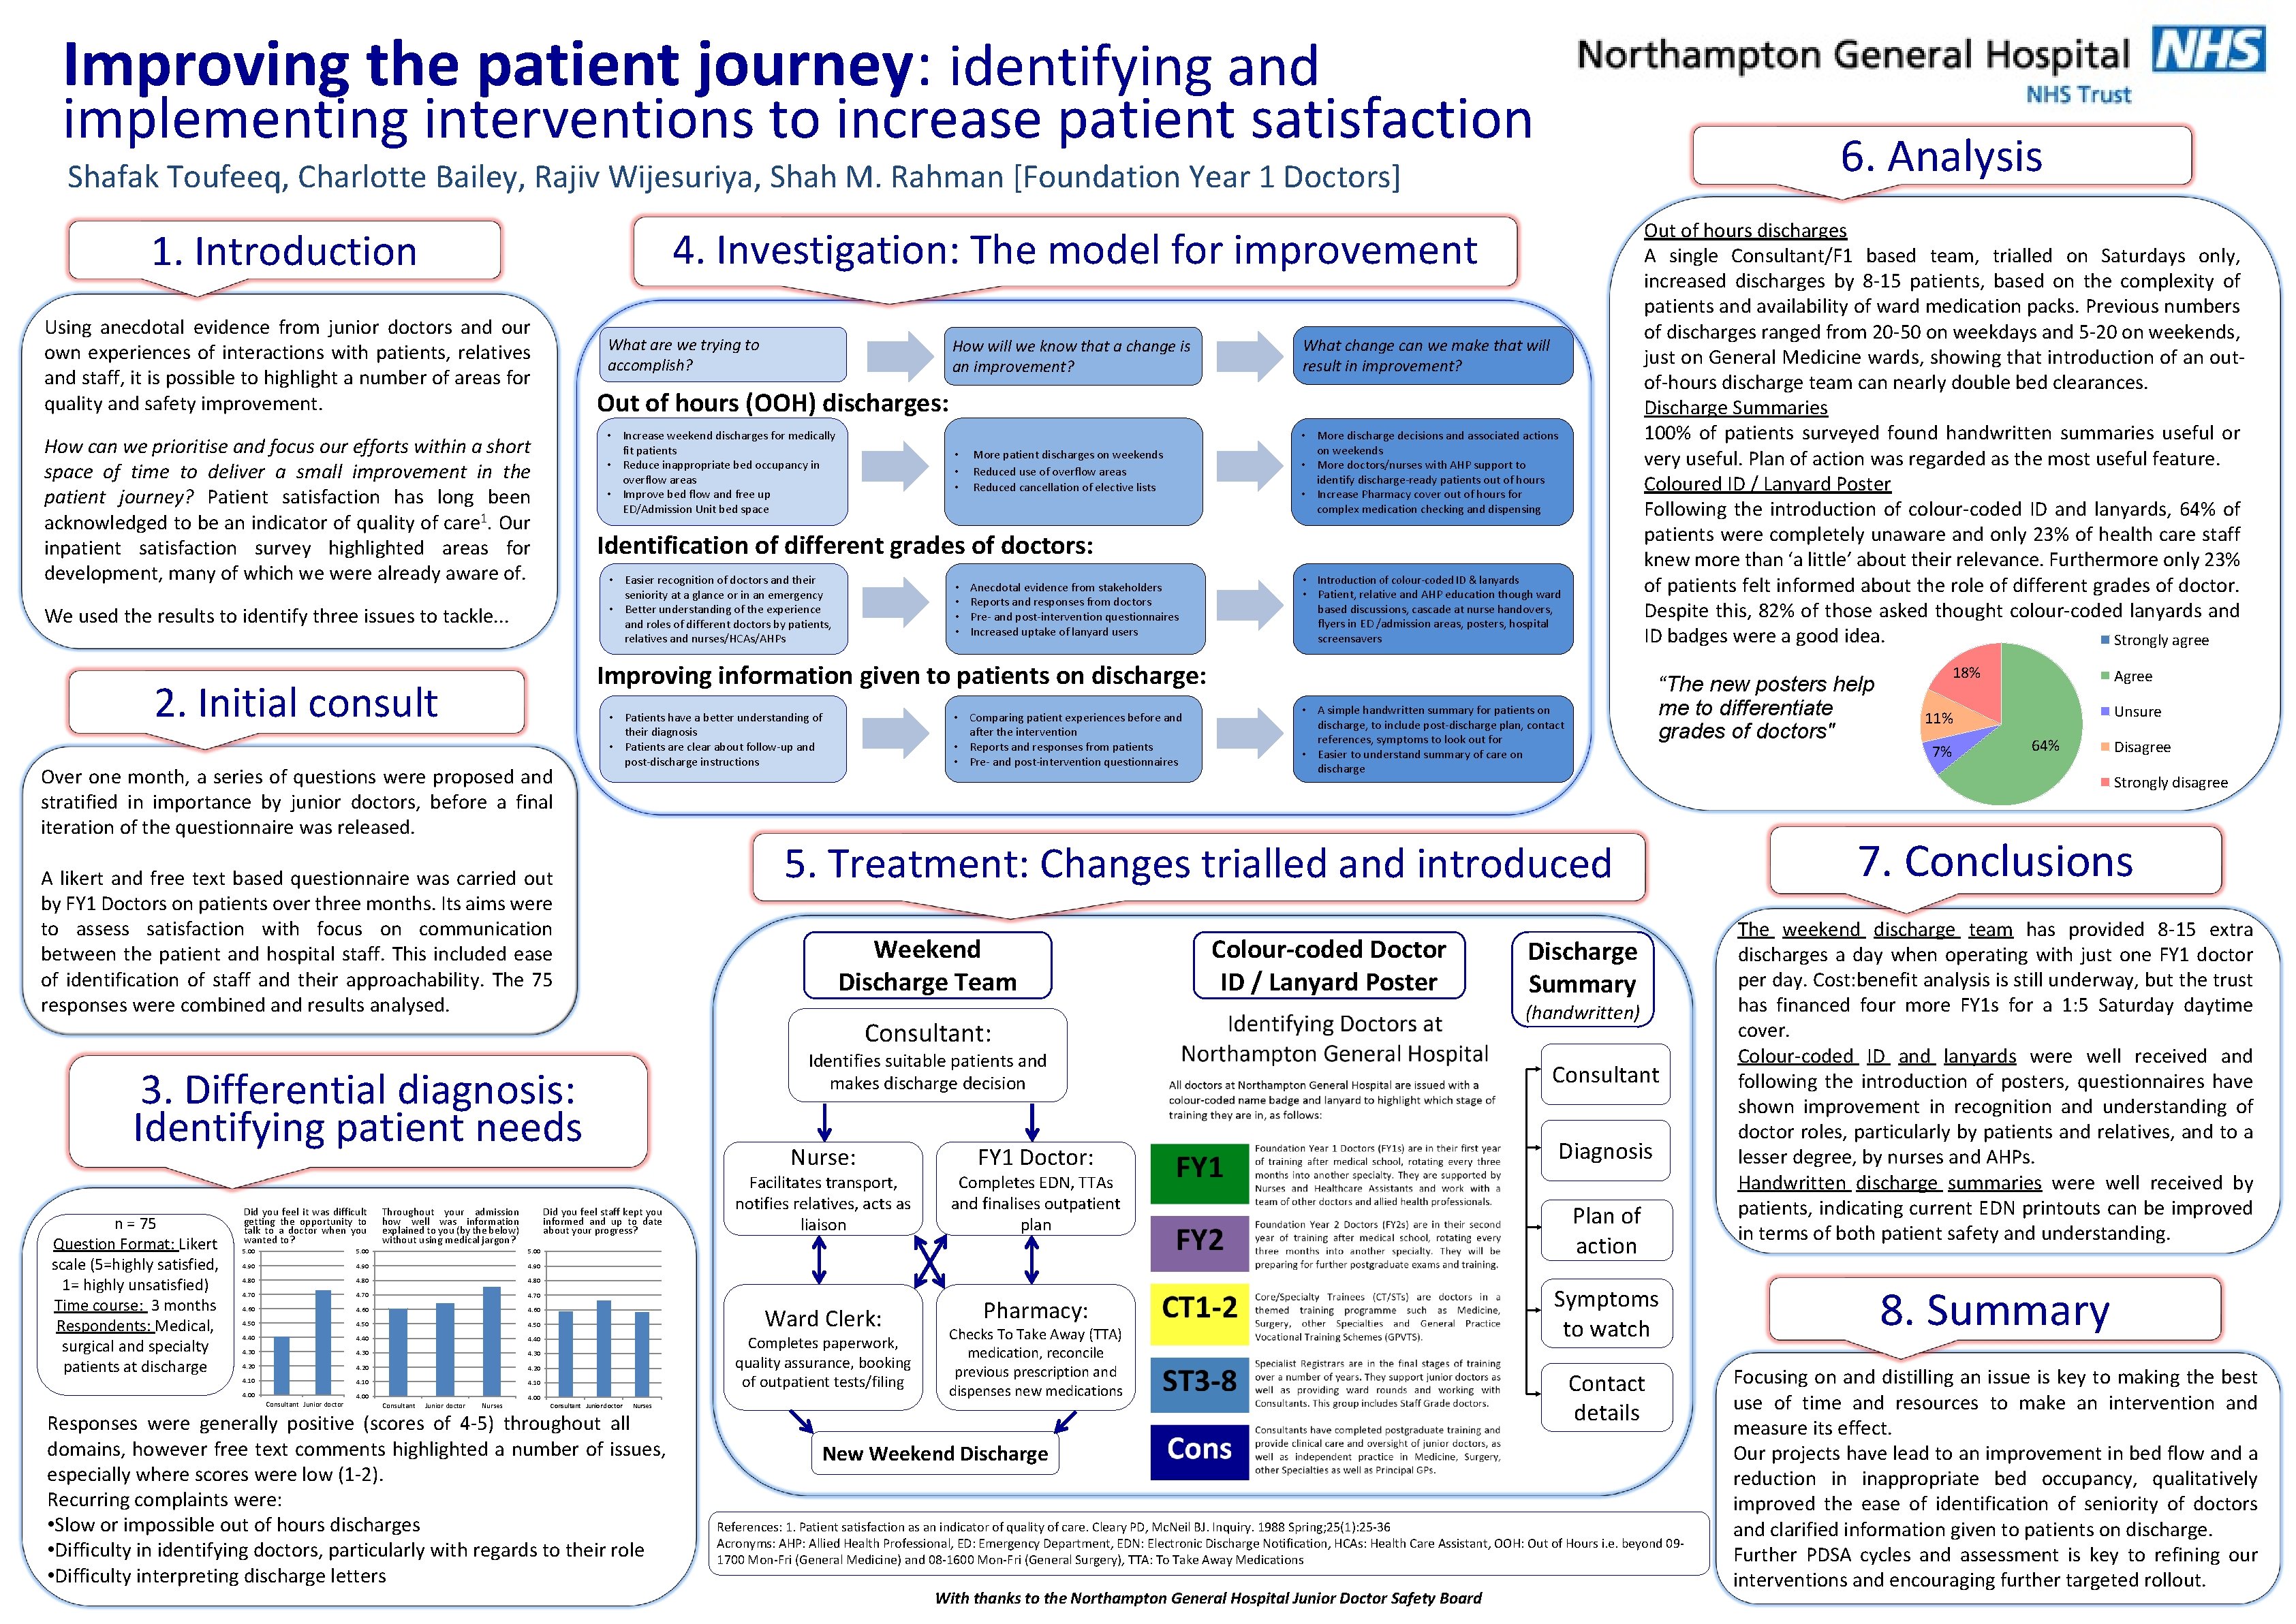 Improving the patient journey: identifying and implementing interventions to increase patient satisfaction 6. Analysis